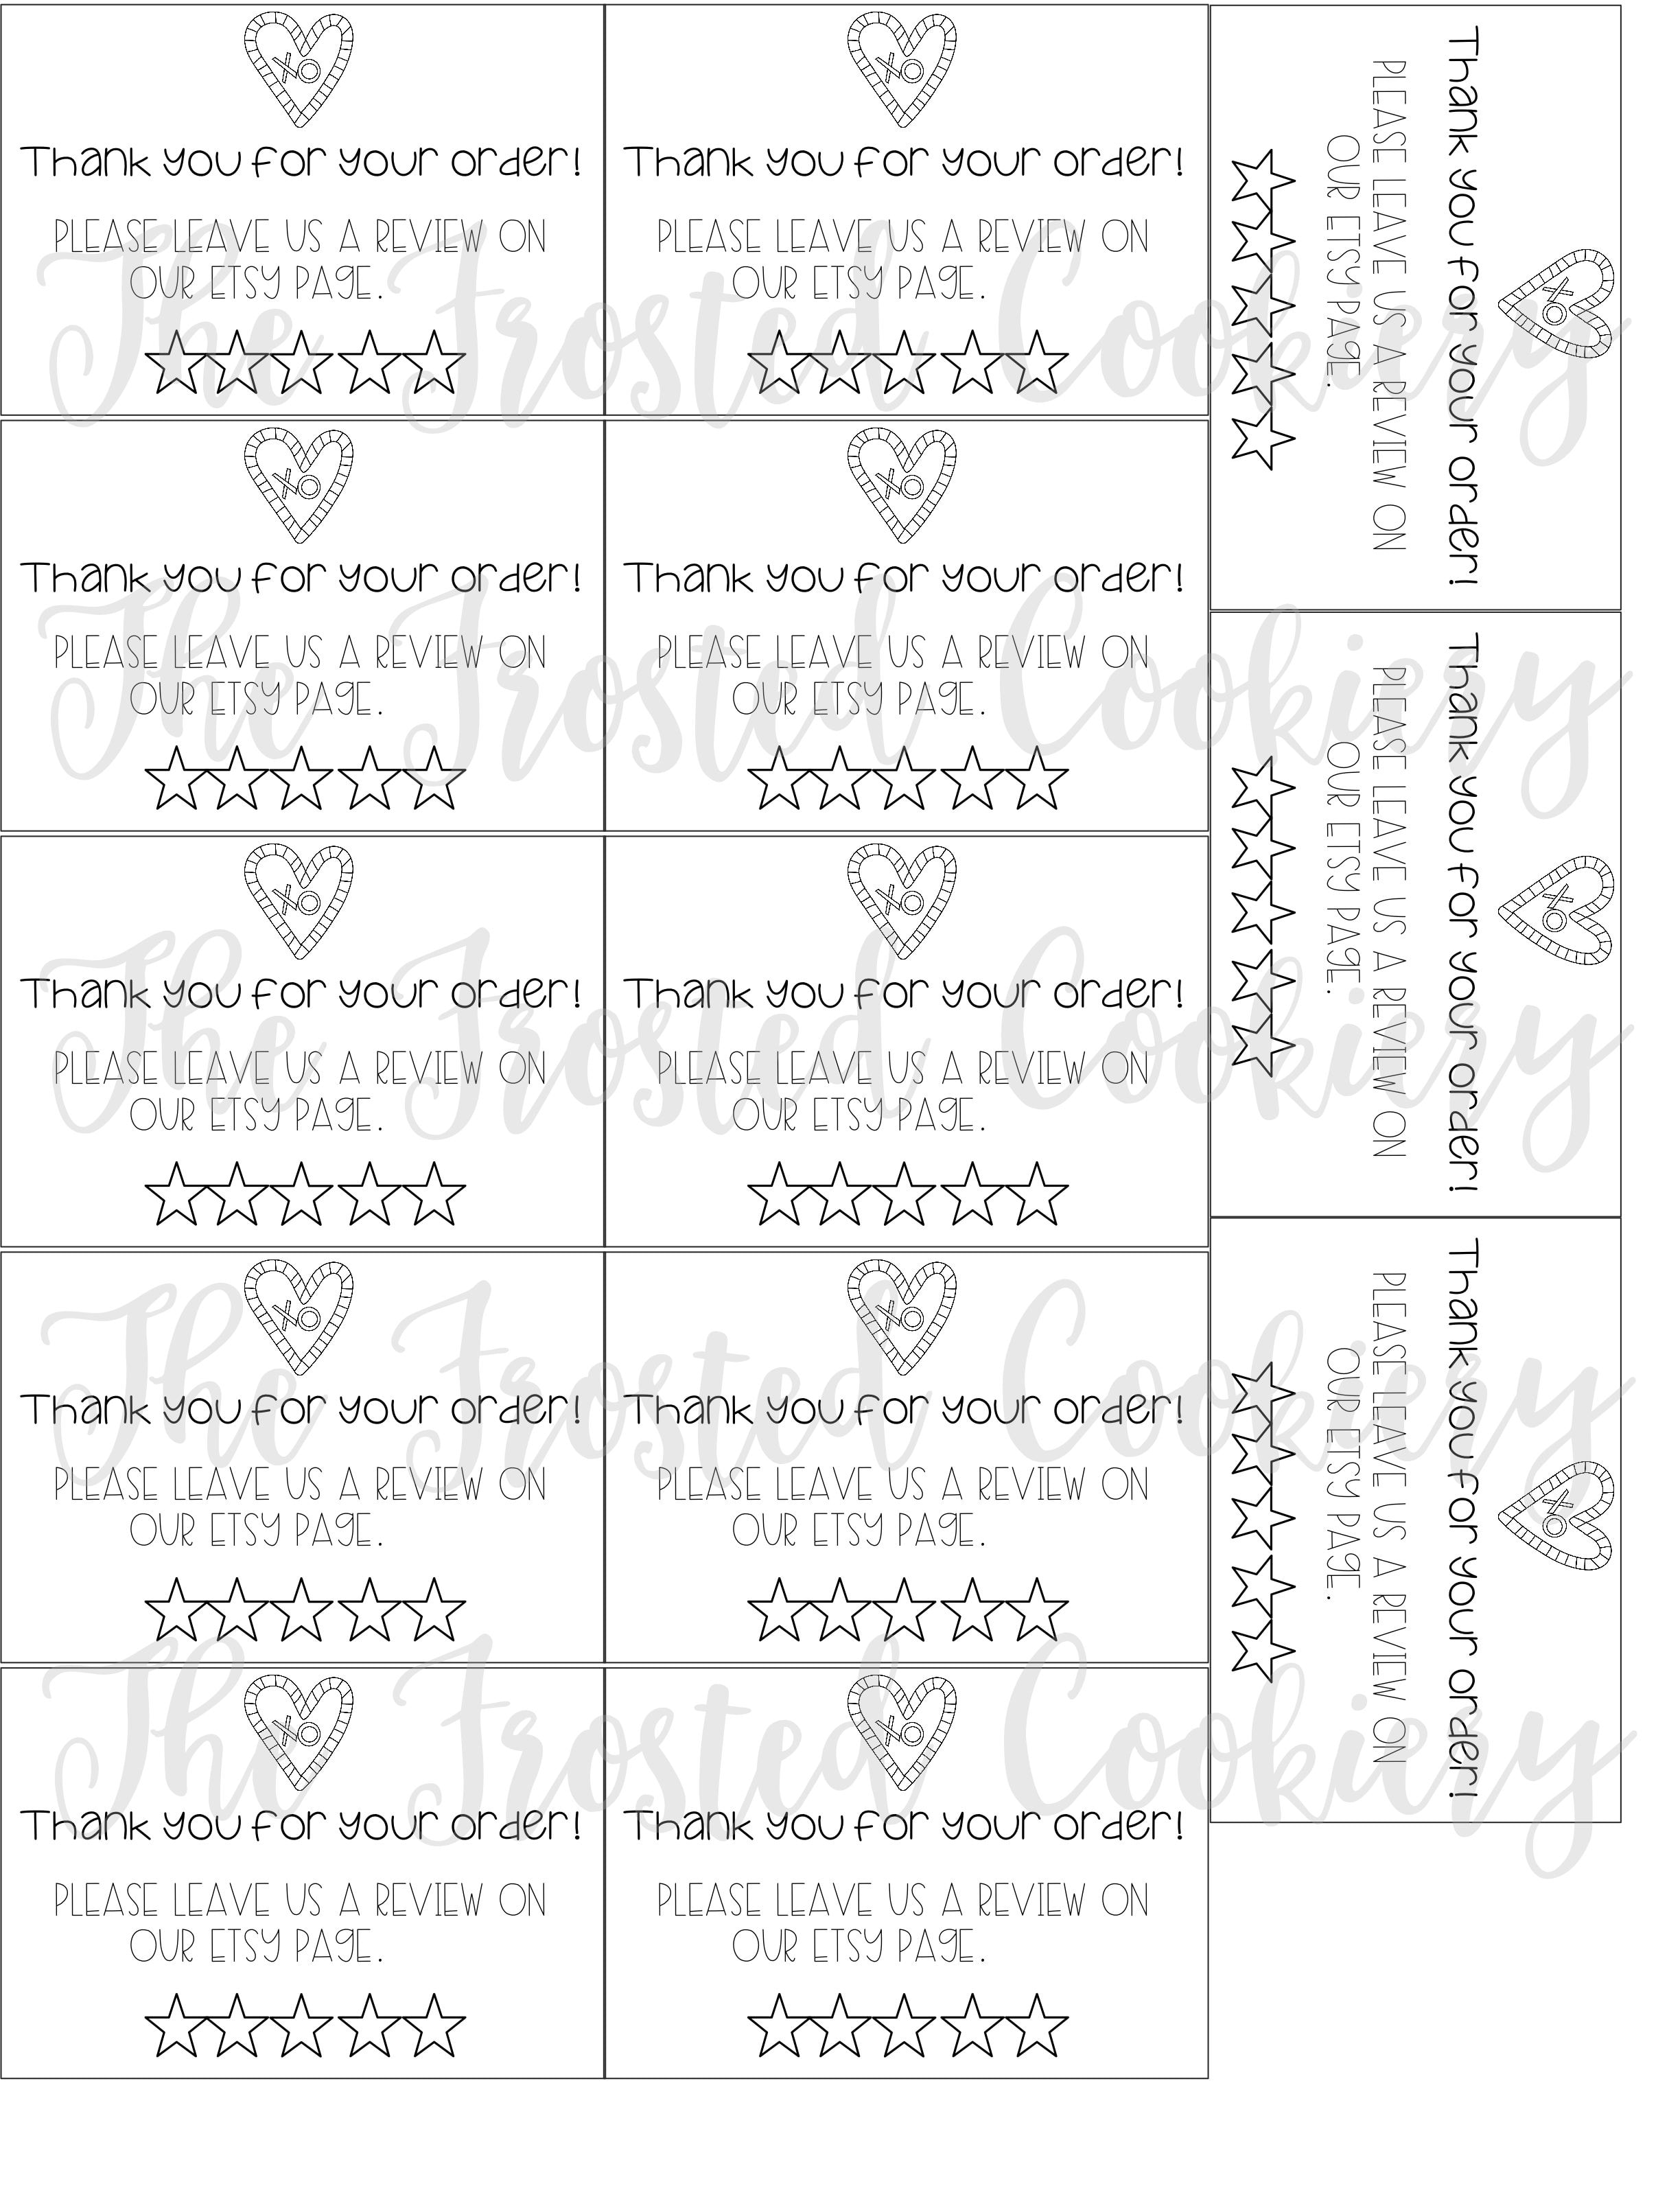 Etsy Review Tags to use with Avery template 5881